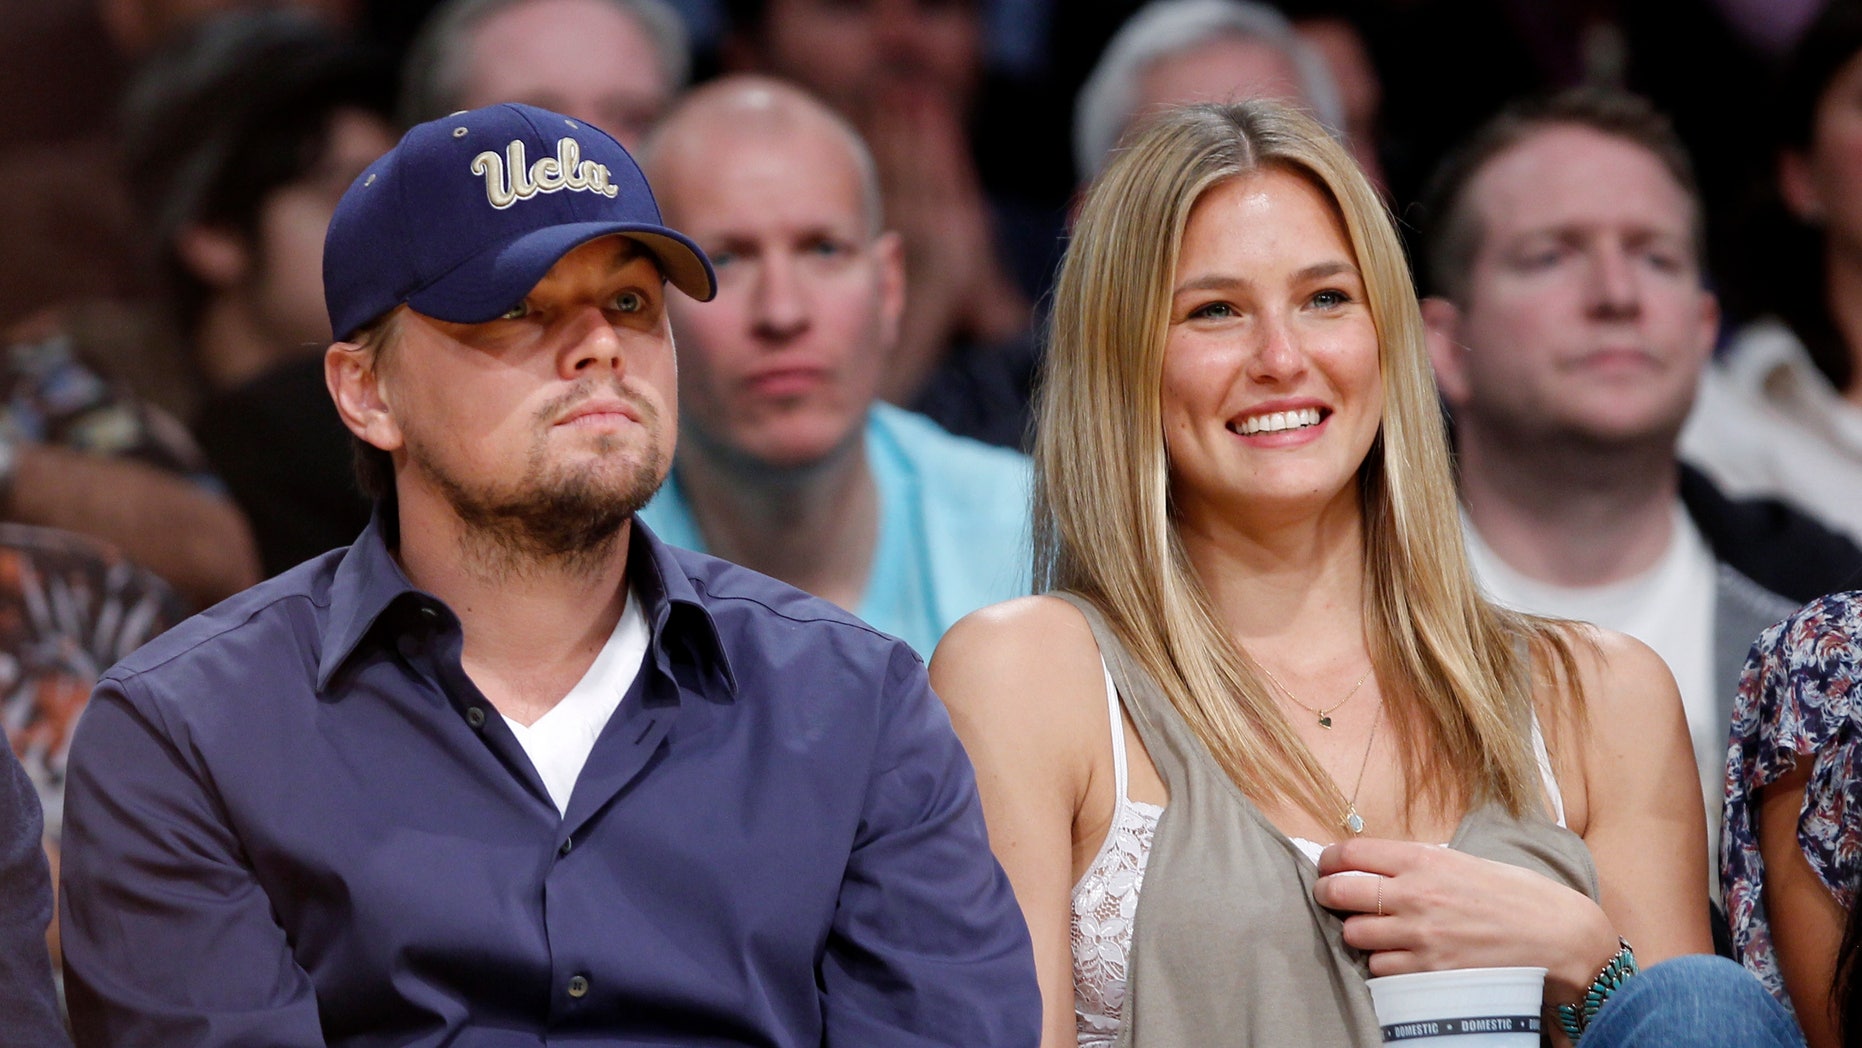 Leonardo DiCaprio is single again: Here's a look at his recent relationships | Fox News1862 x 1048